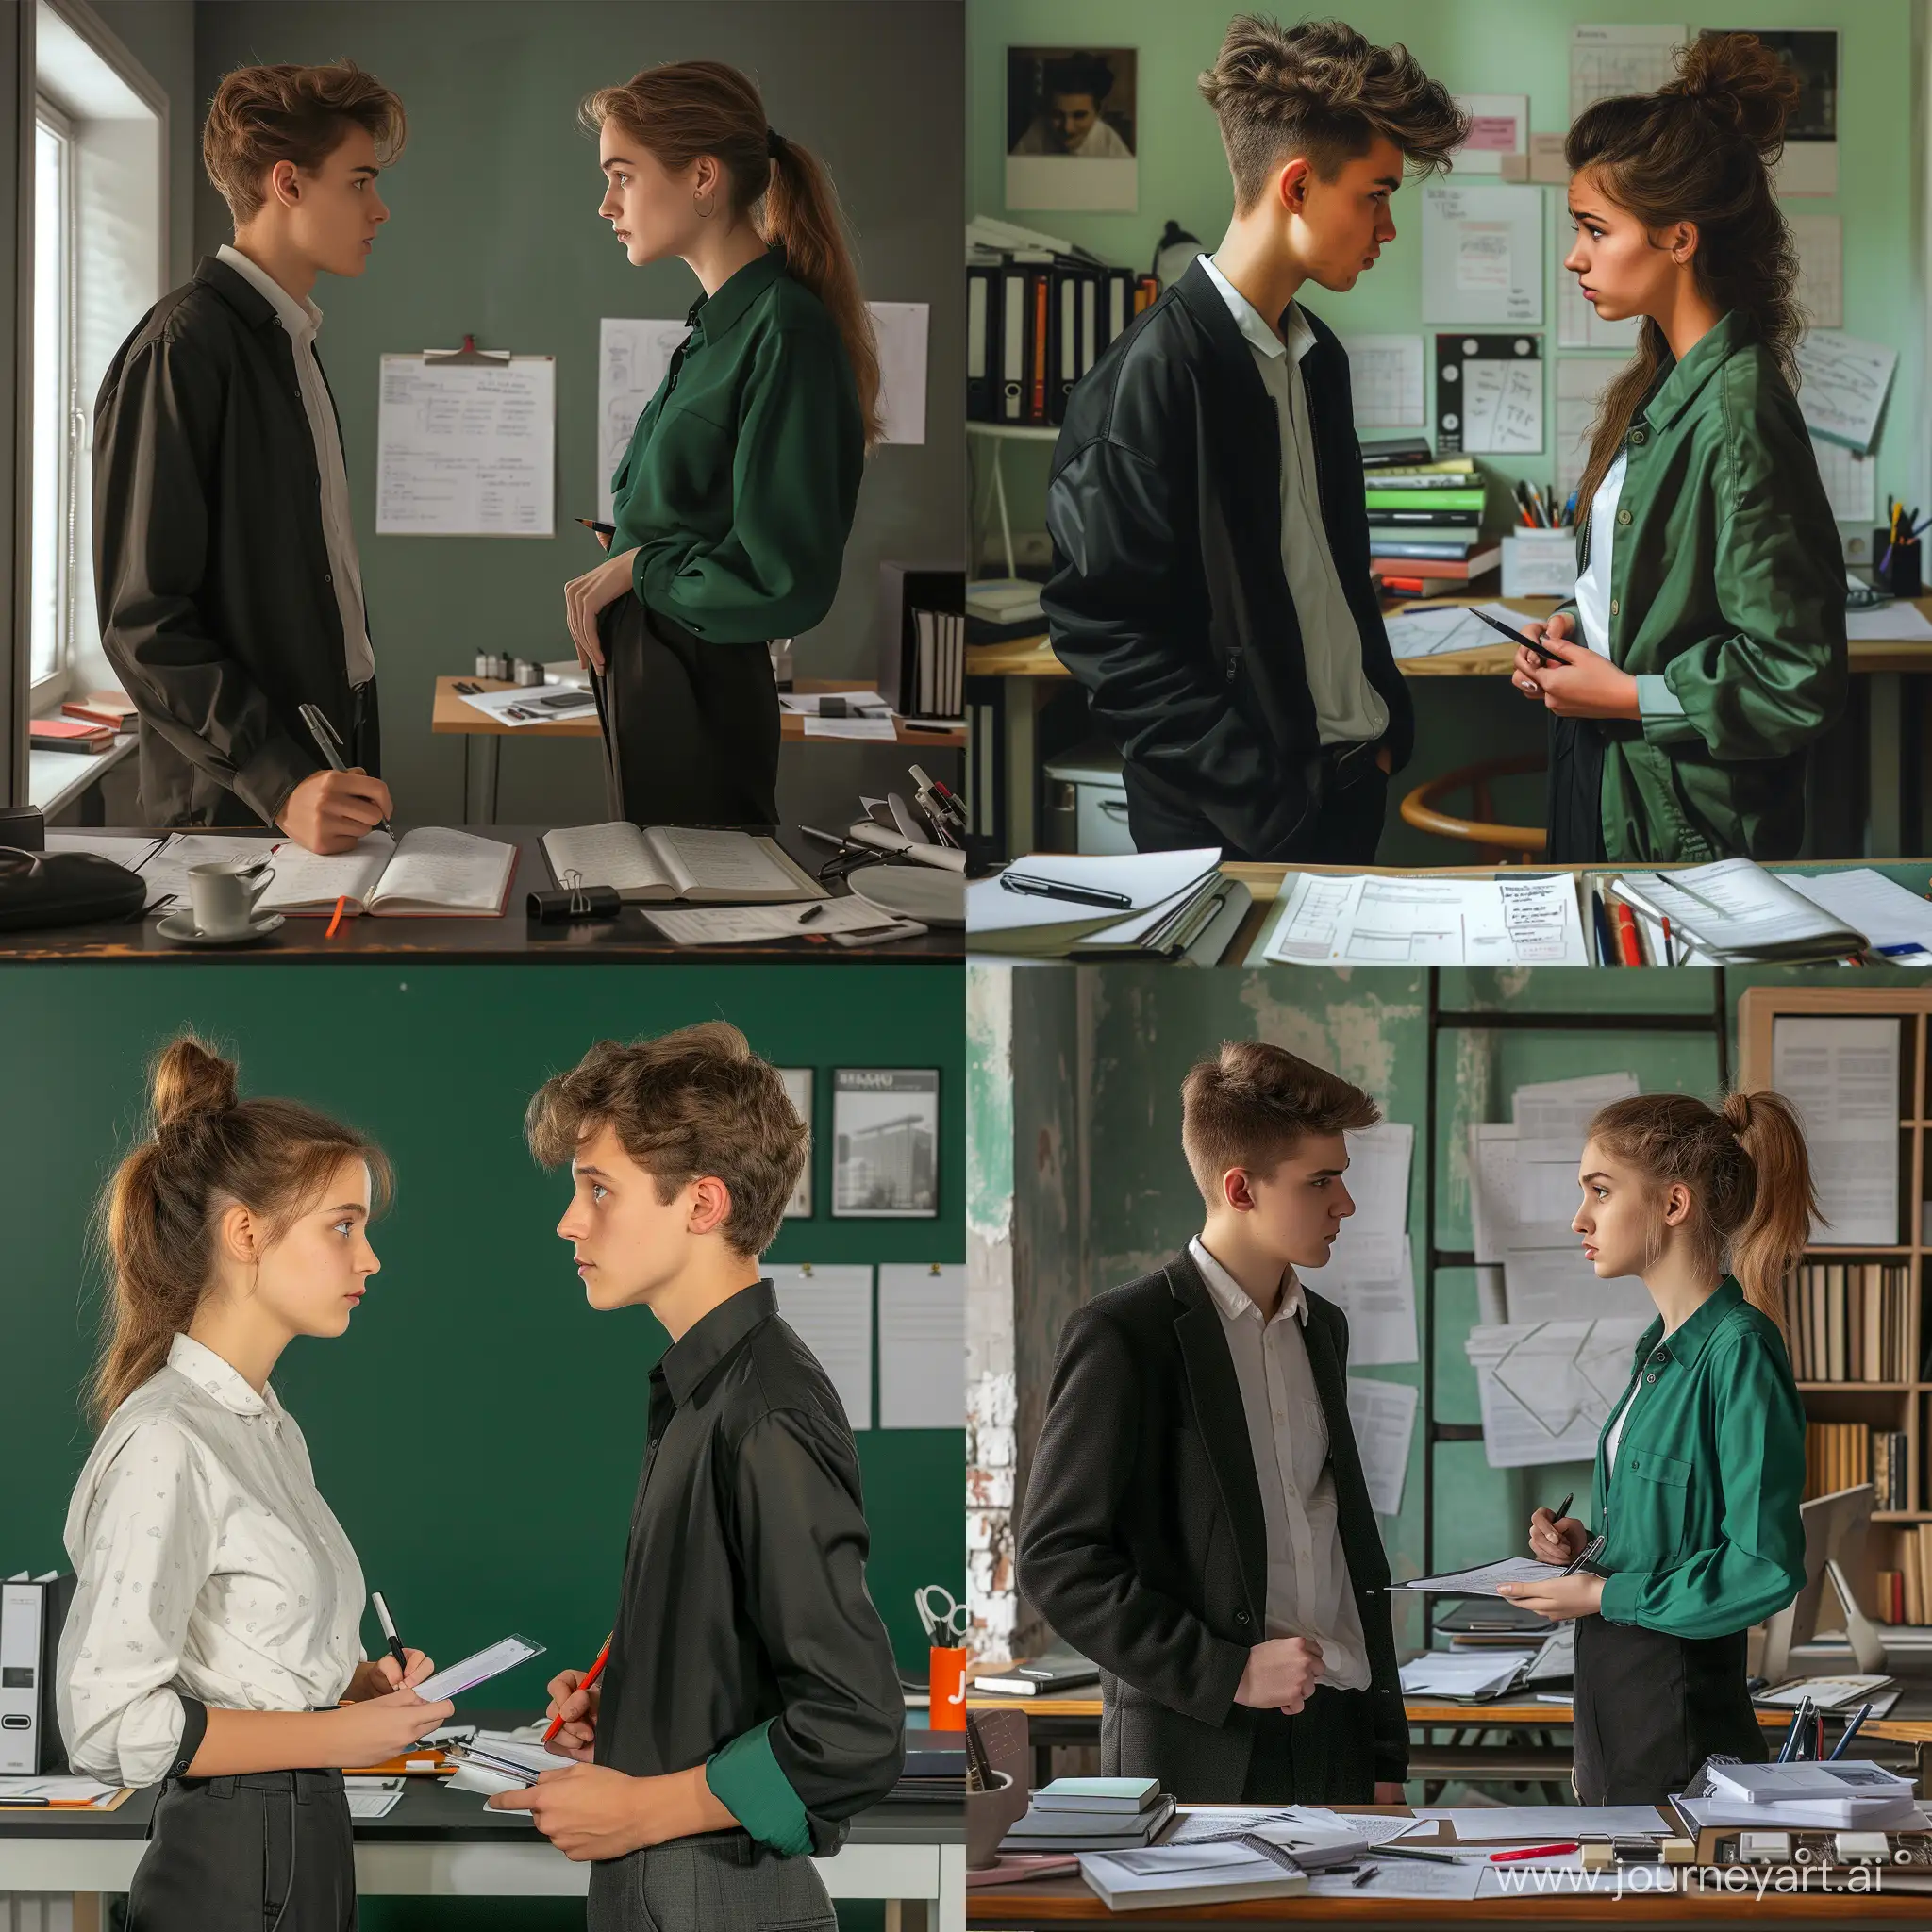 ultra realistic, two young people - a man and a woman, stand opposite each other and discuss a sensitive social topic, negotiate, write down each other's arguments, both are dressed in a business style, the colors of the picture are muted, combining shades of white green and black colors , there is a business environment around, a room intended for debates and polemics, books, papers and office supplies are placed